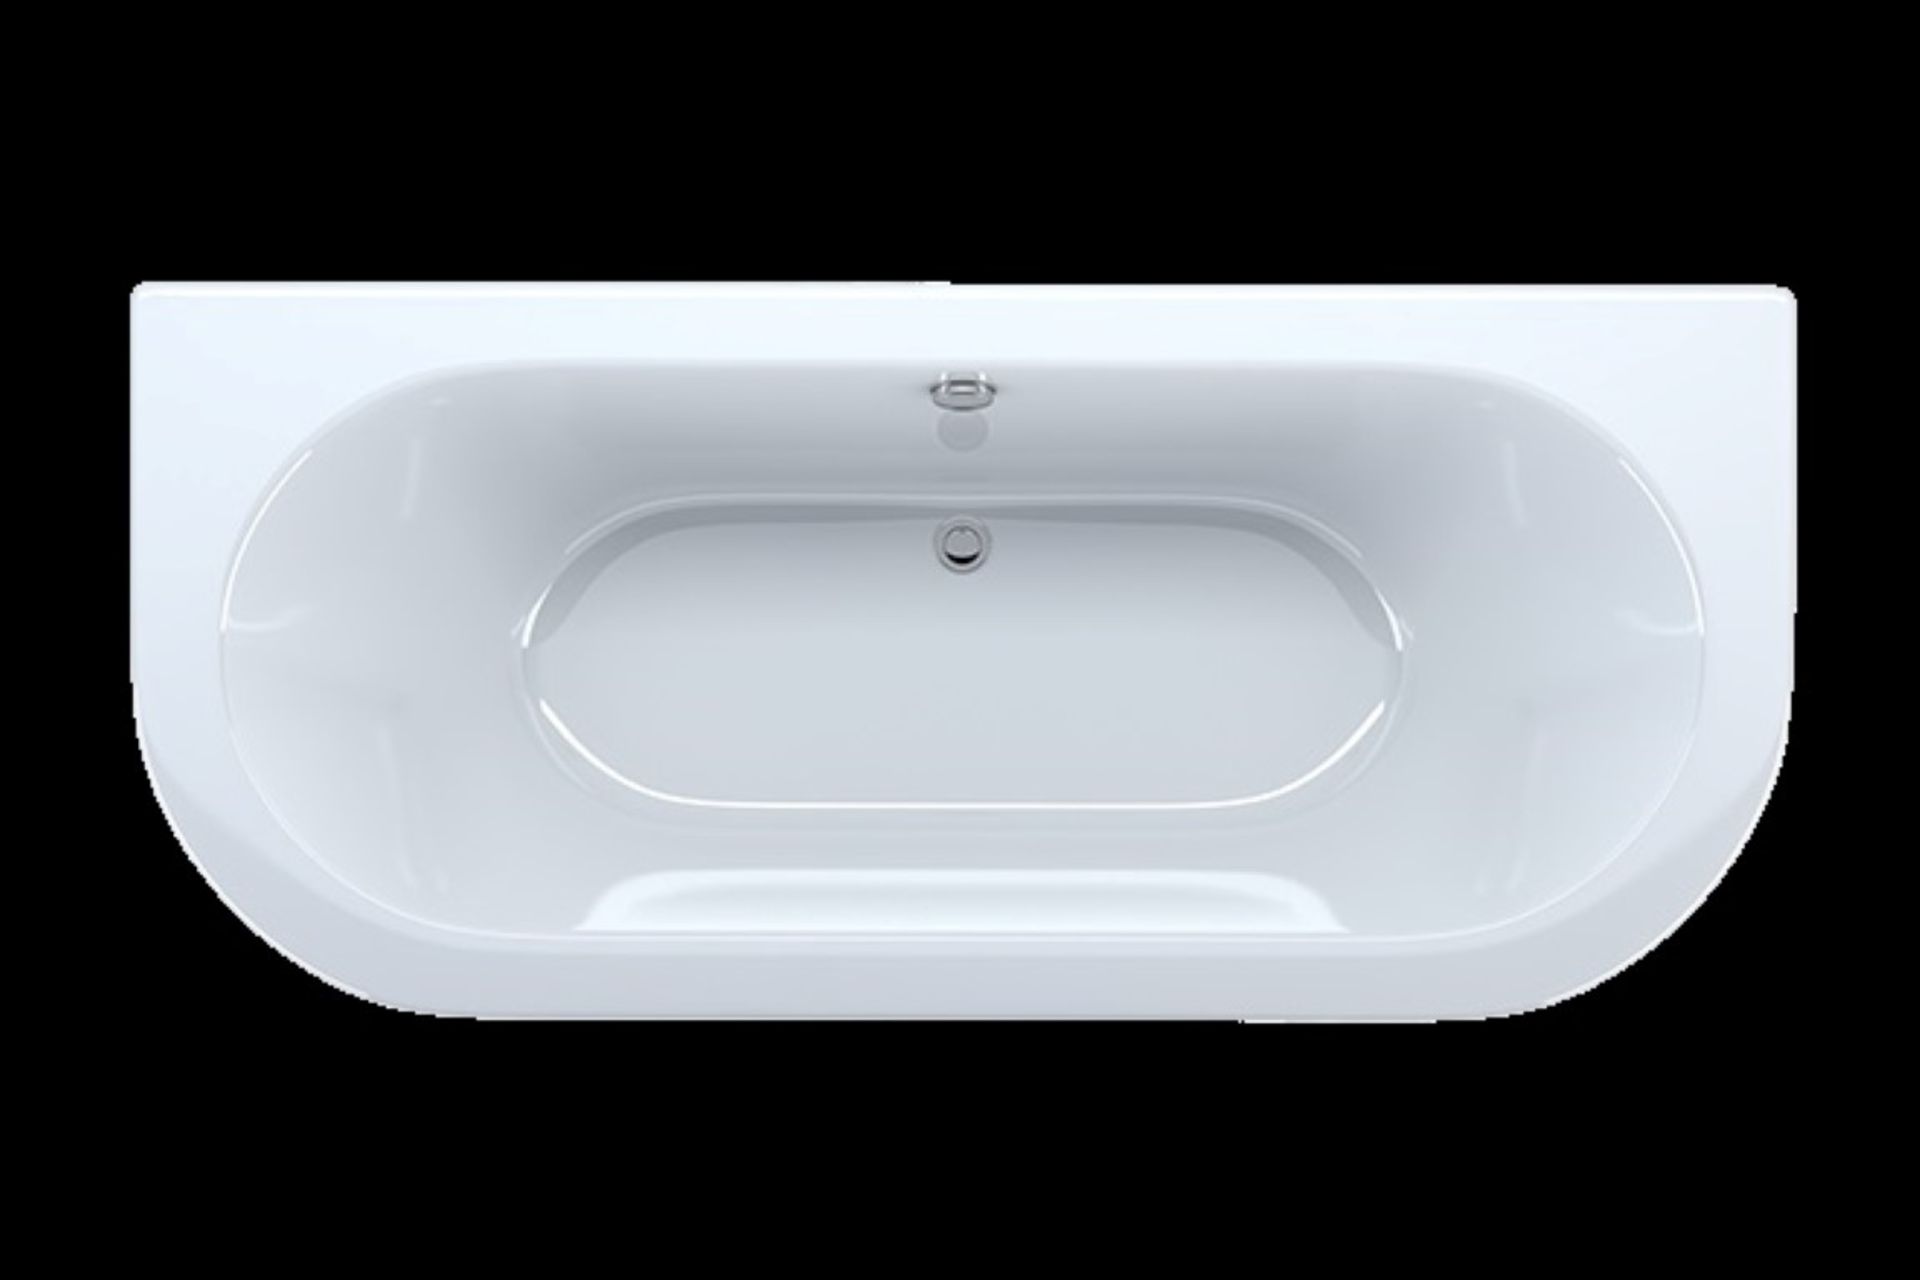 1 x "Palladio" BACK TO WALL BATH - Stylish Curvaceous Design - White Acrylic - 1700 X 750MM - - Image 5 of 9